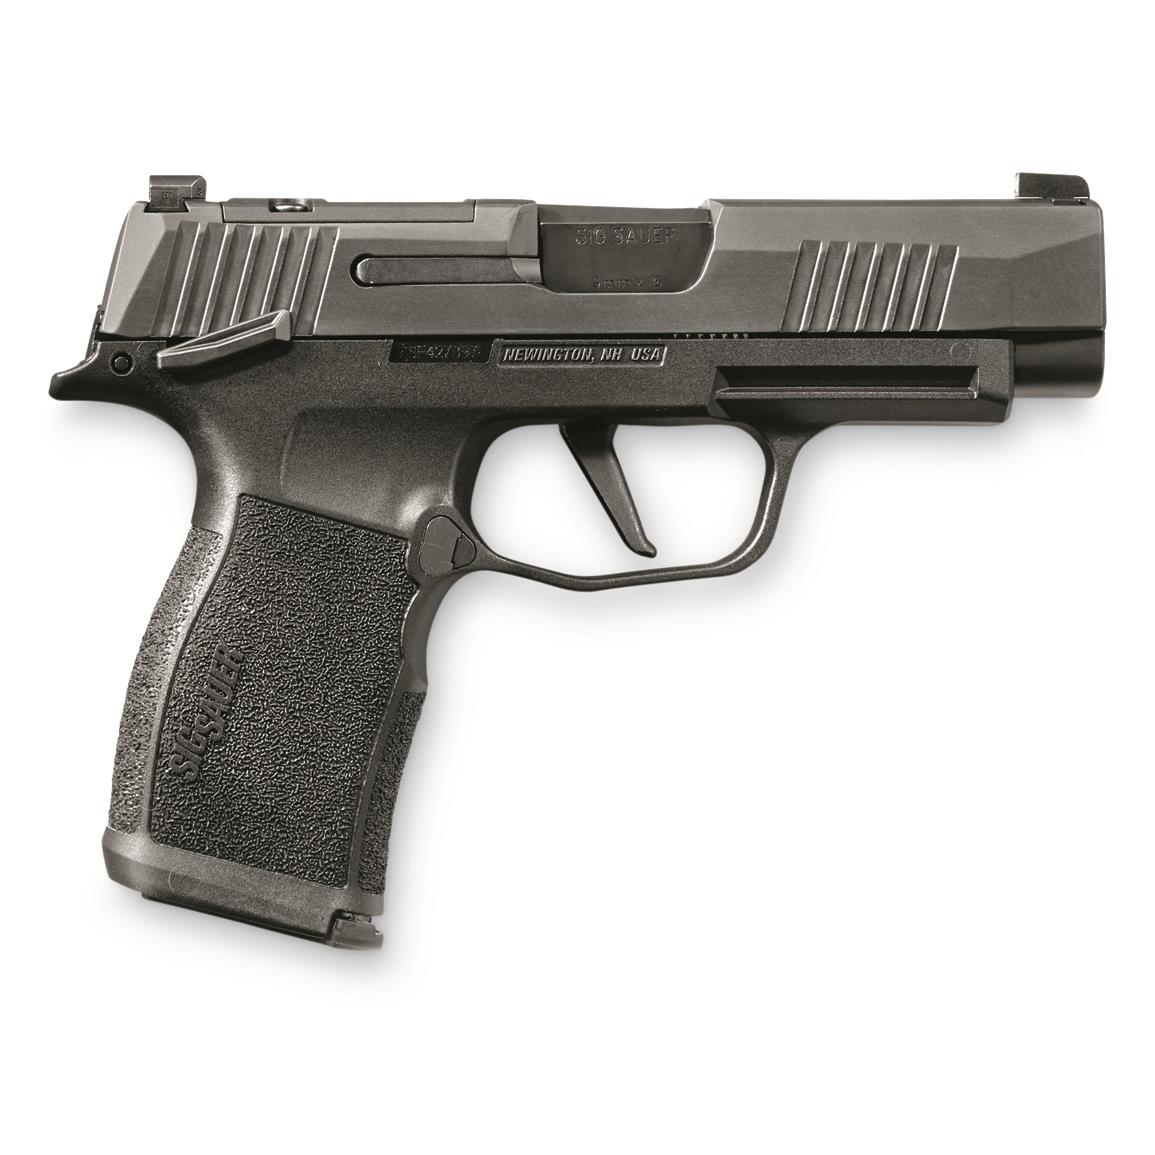 SIG SAUER P365 XL, Semi-automatic, 9mm, 3.7" Barrel, Manual Safety, 12+1 Rounds